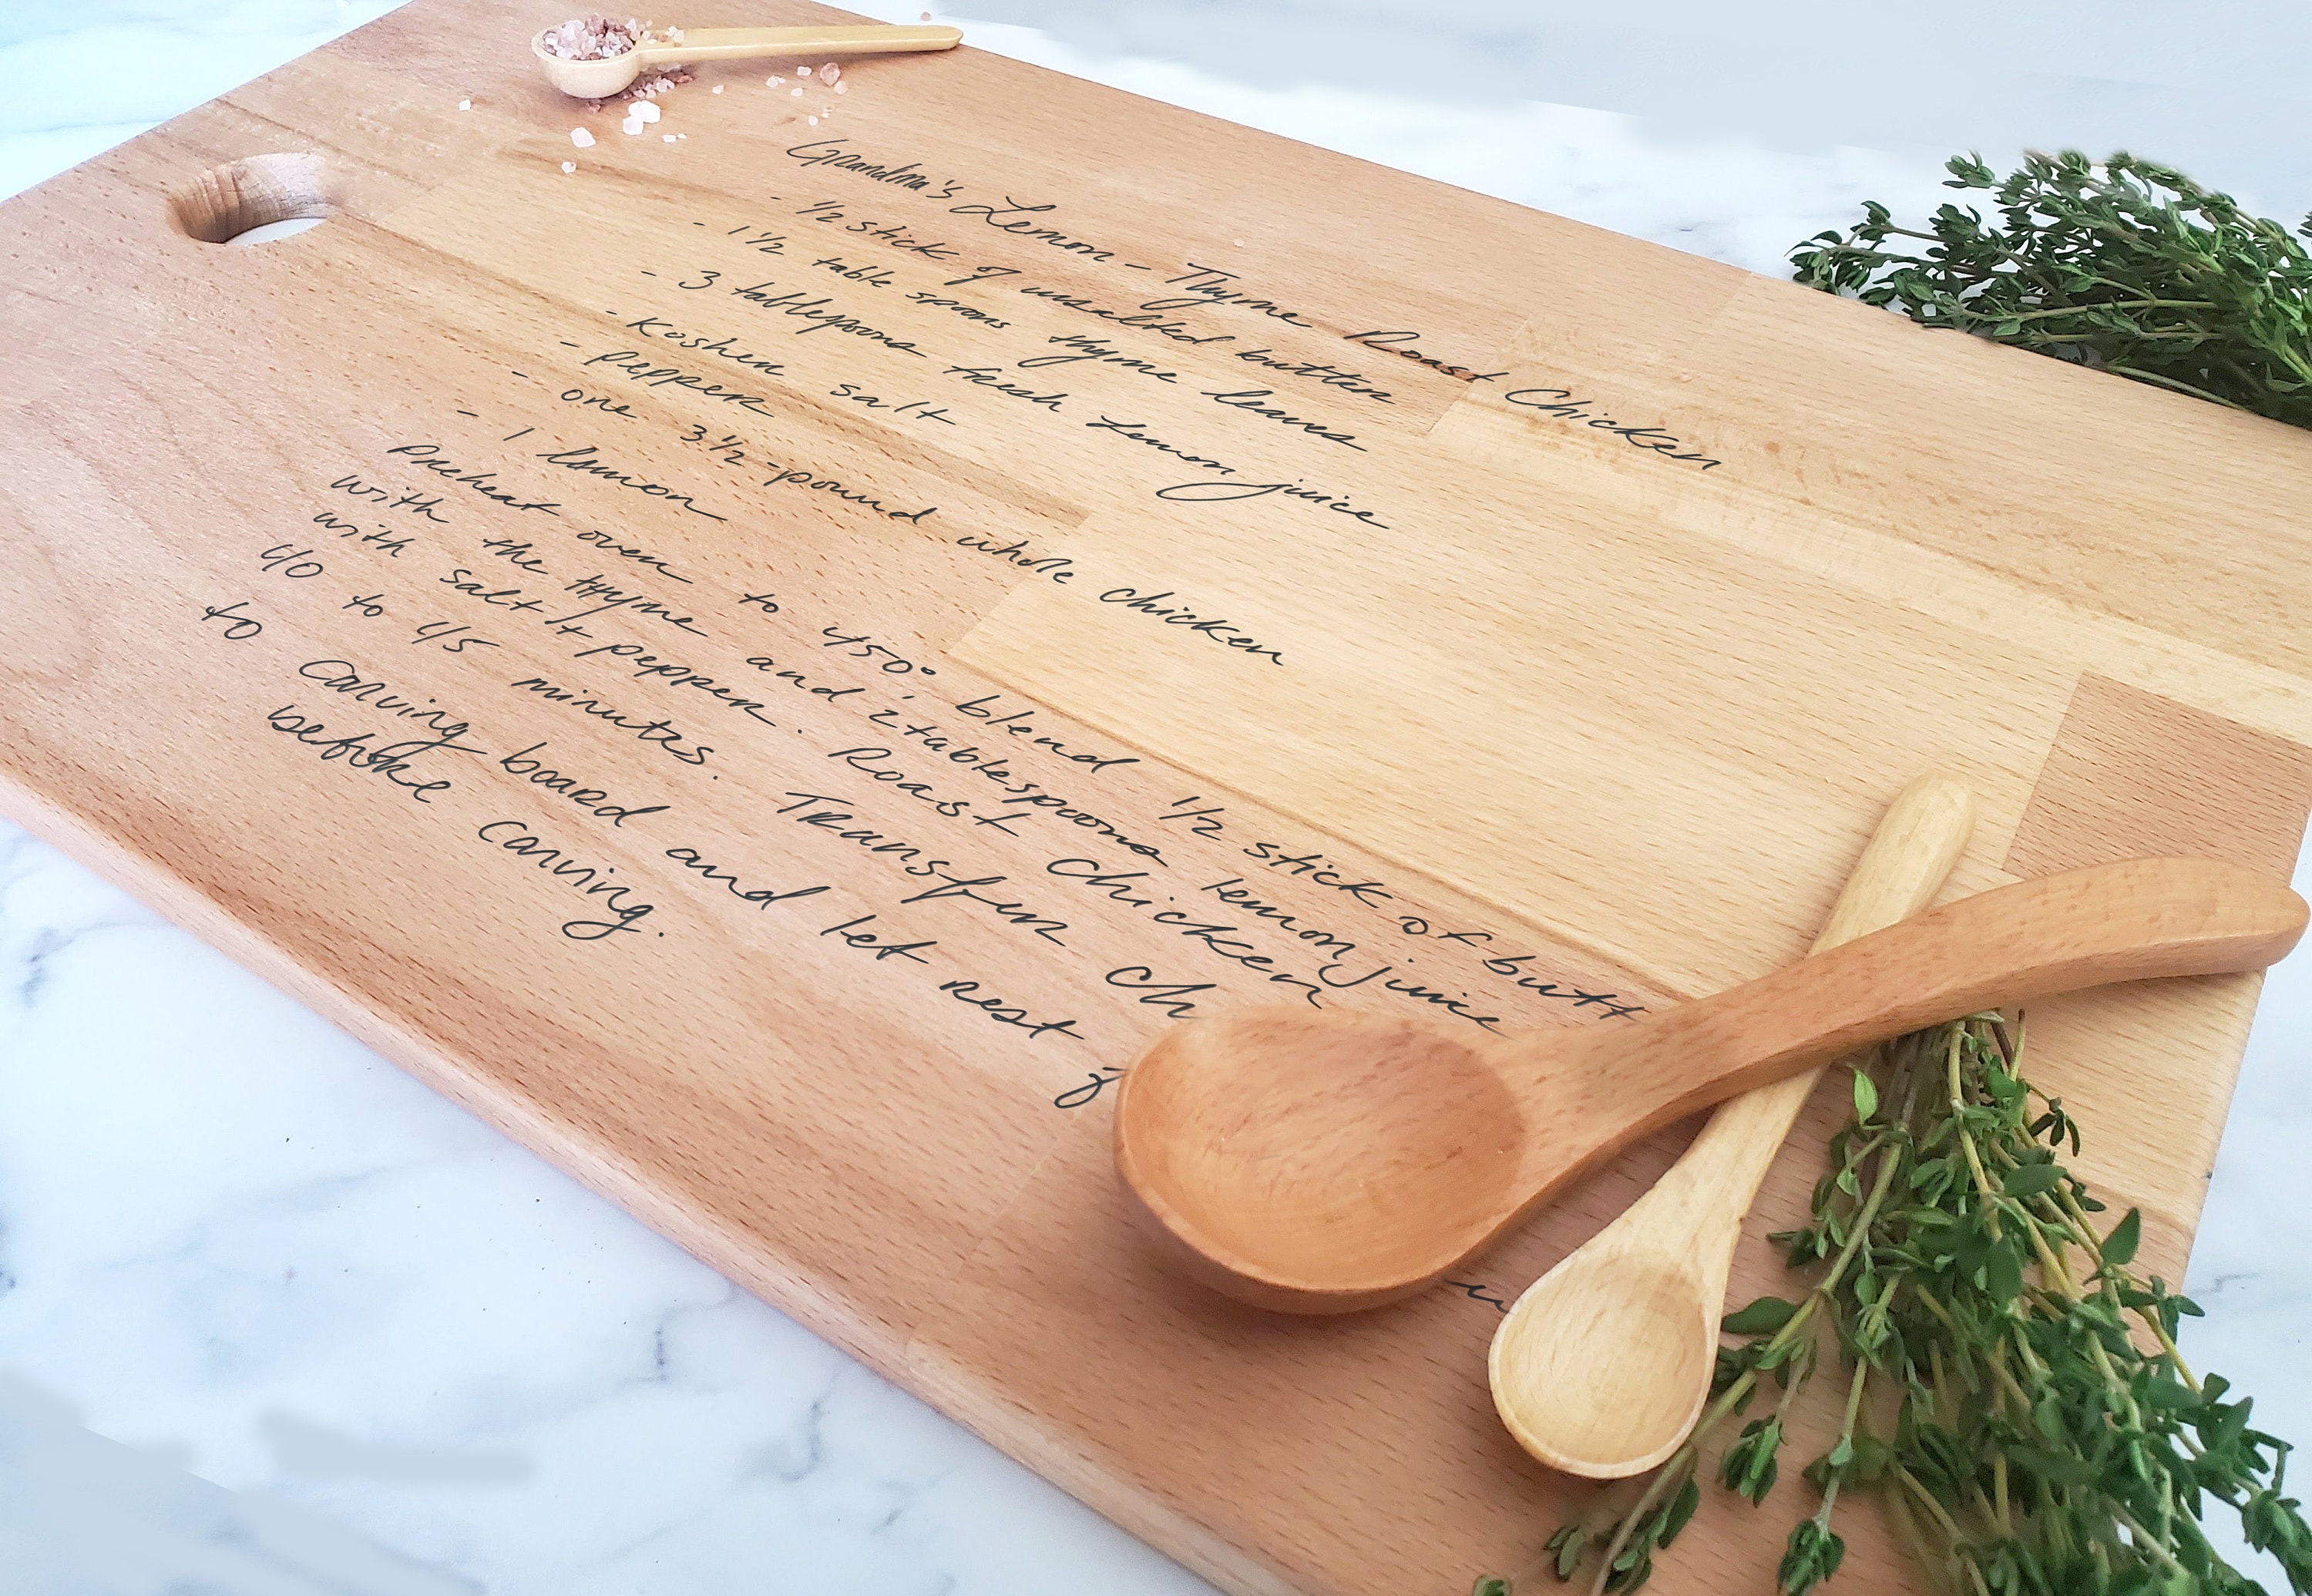  Aunt Gifts，Gifts for Aunt Christmas, Aunt Gifts from Niece, Cutting  Boards Gift with Utensil Set, Unique Engraved Bamboo Cutting Board Present  for Aunt Birthday, Christmas: Home & Kitchen